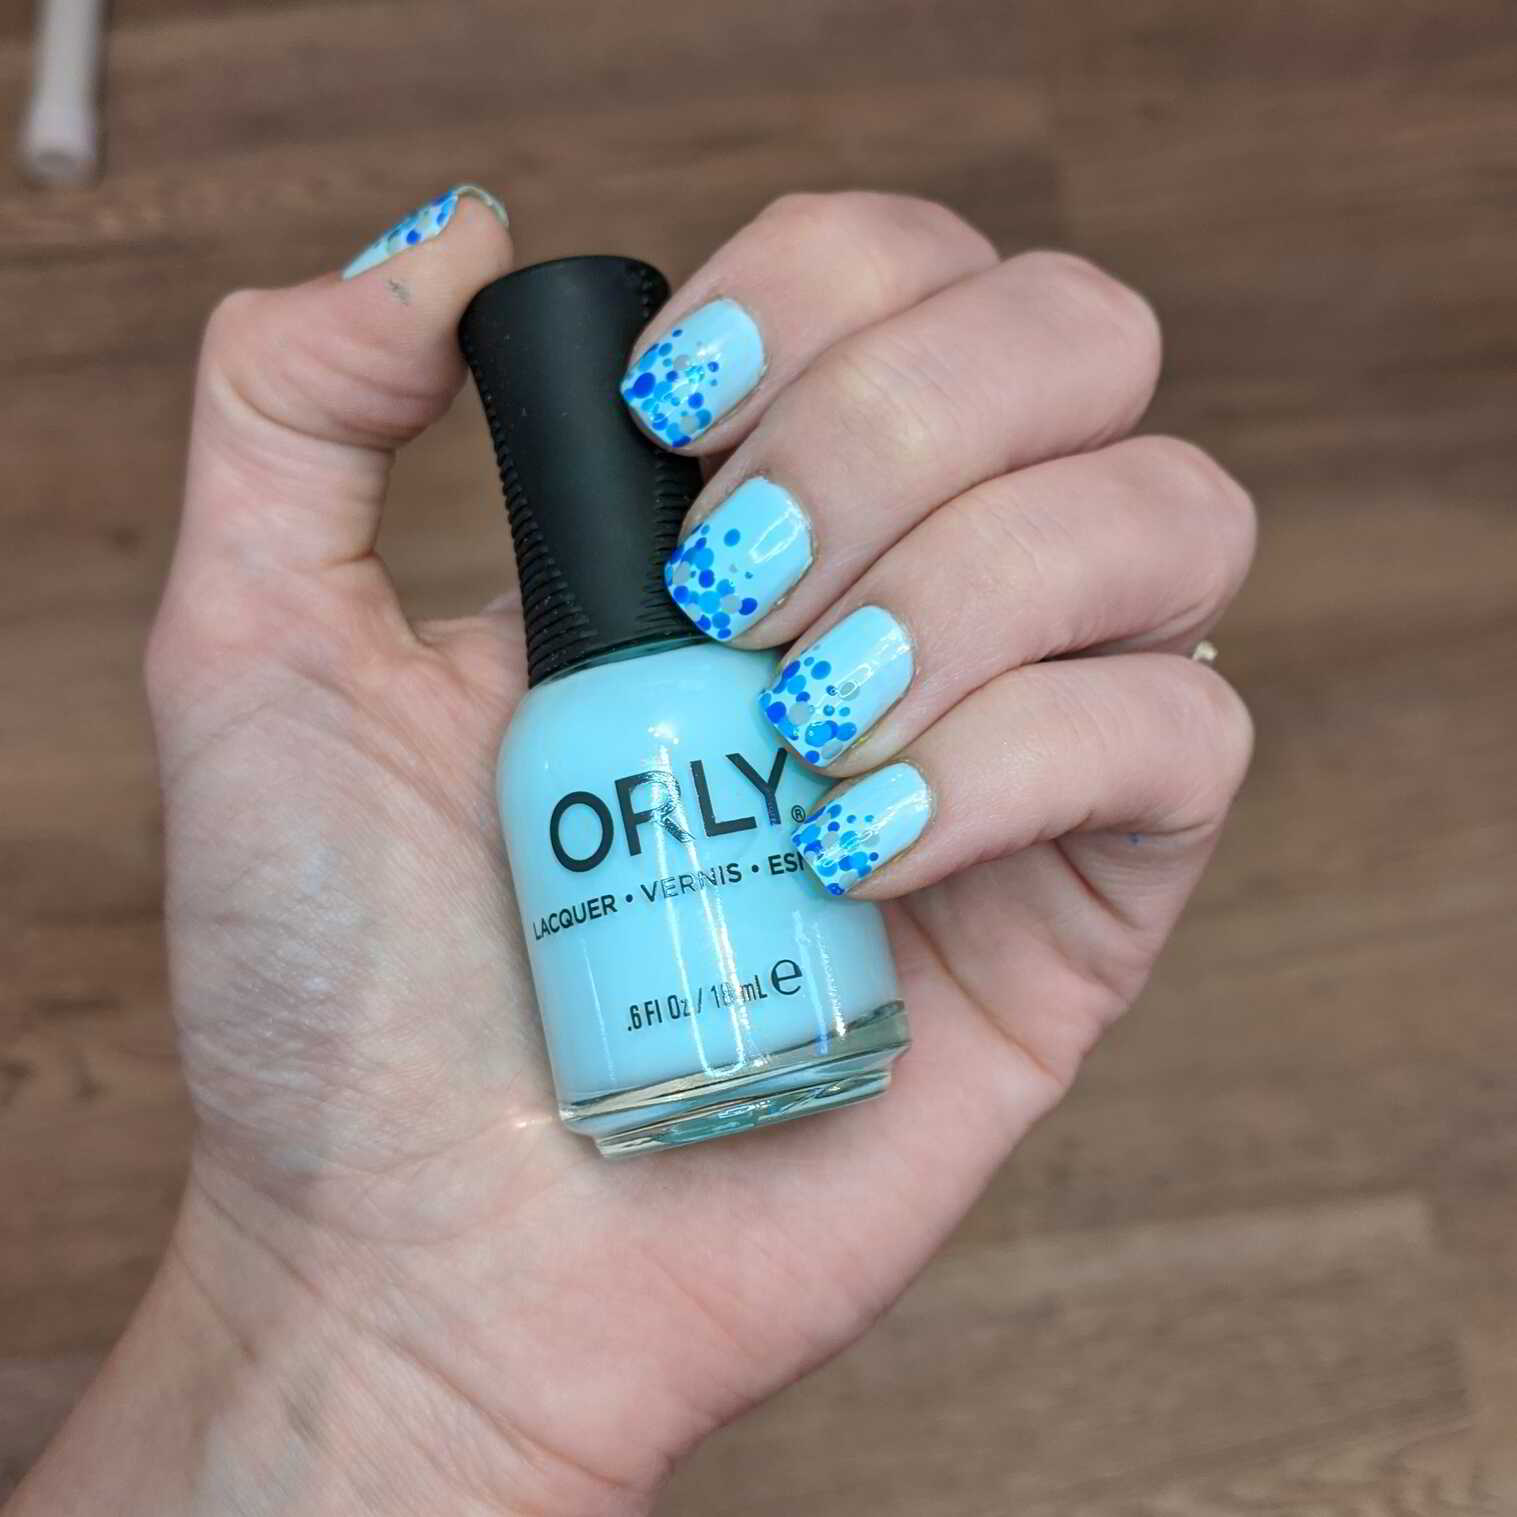 Nail polish manicure of shade Orly Happy camper, 